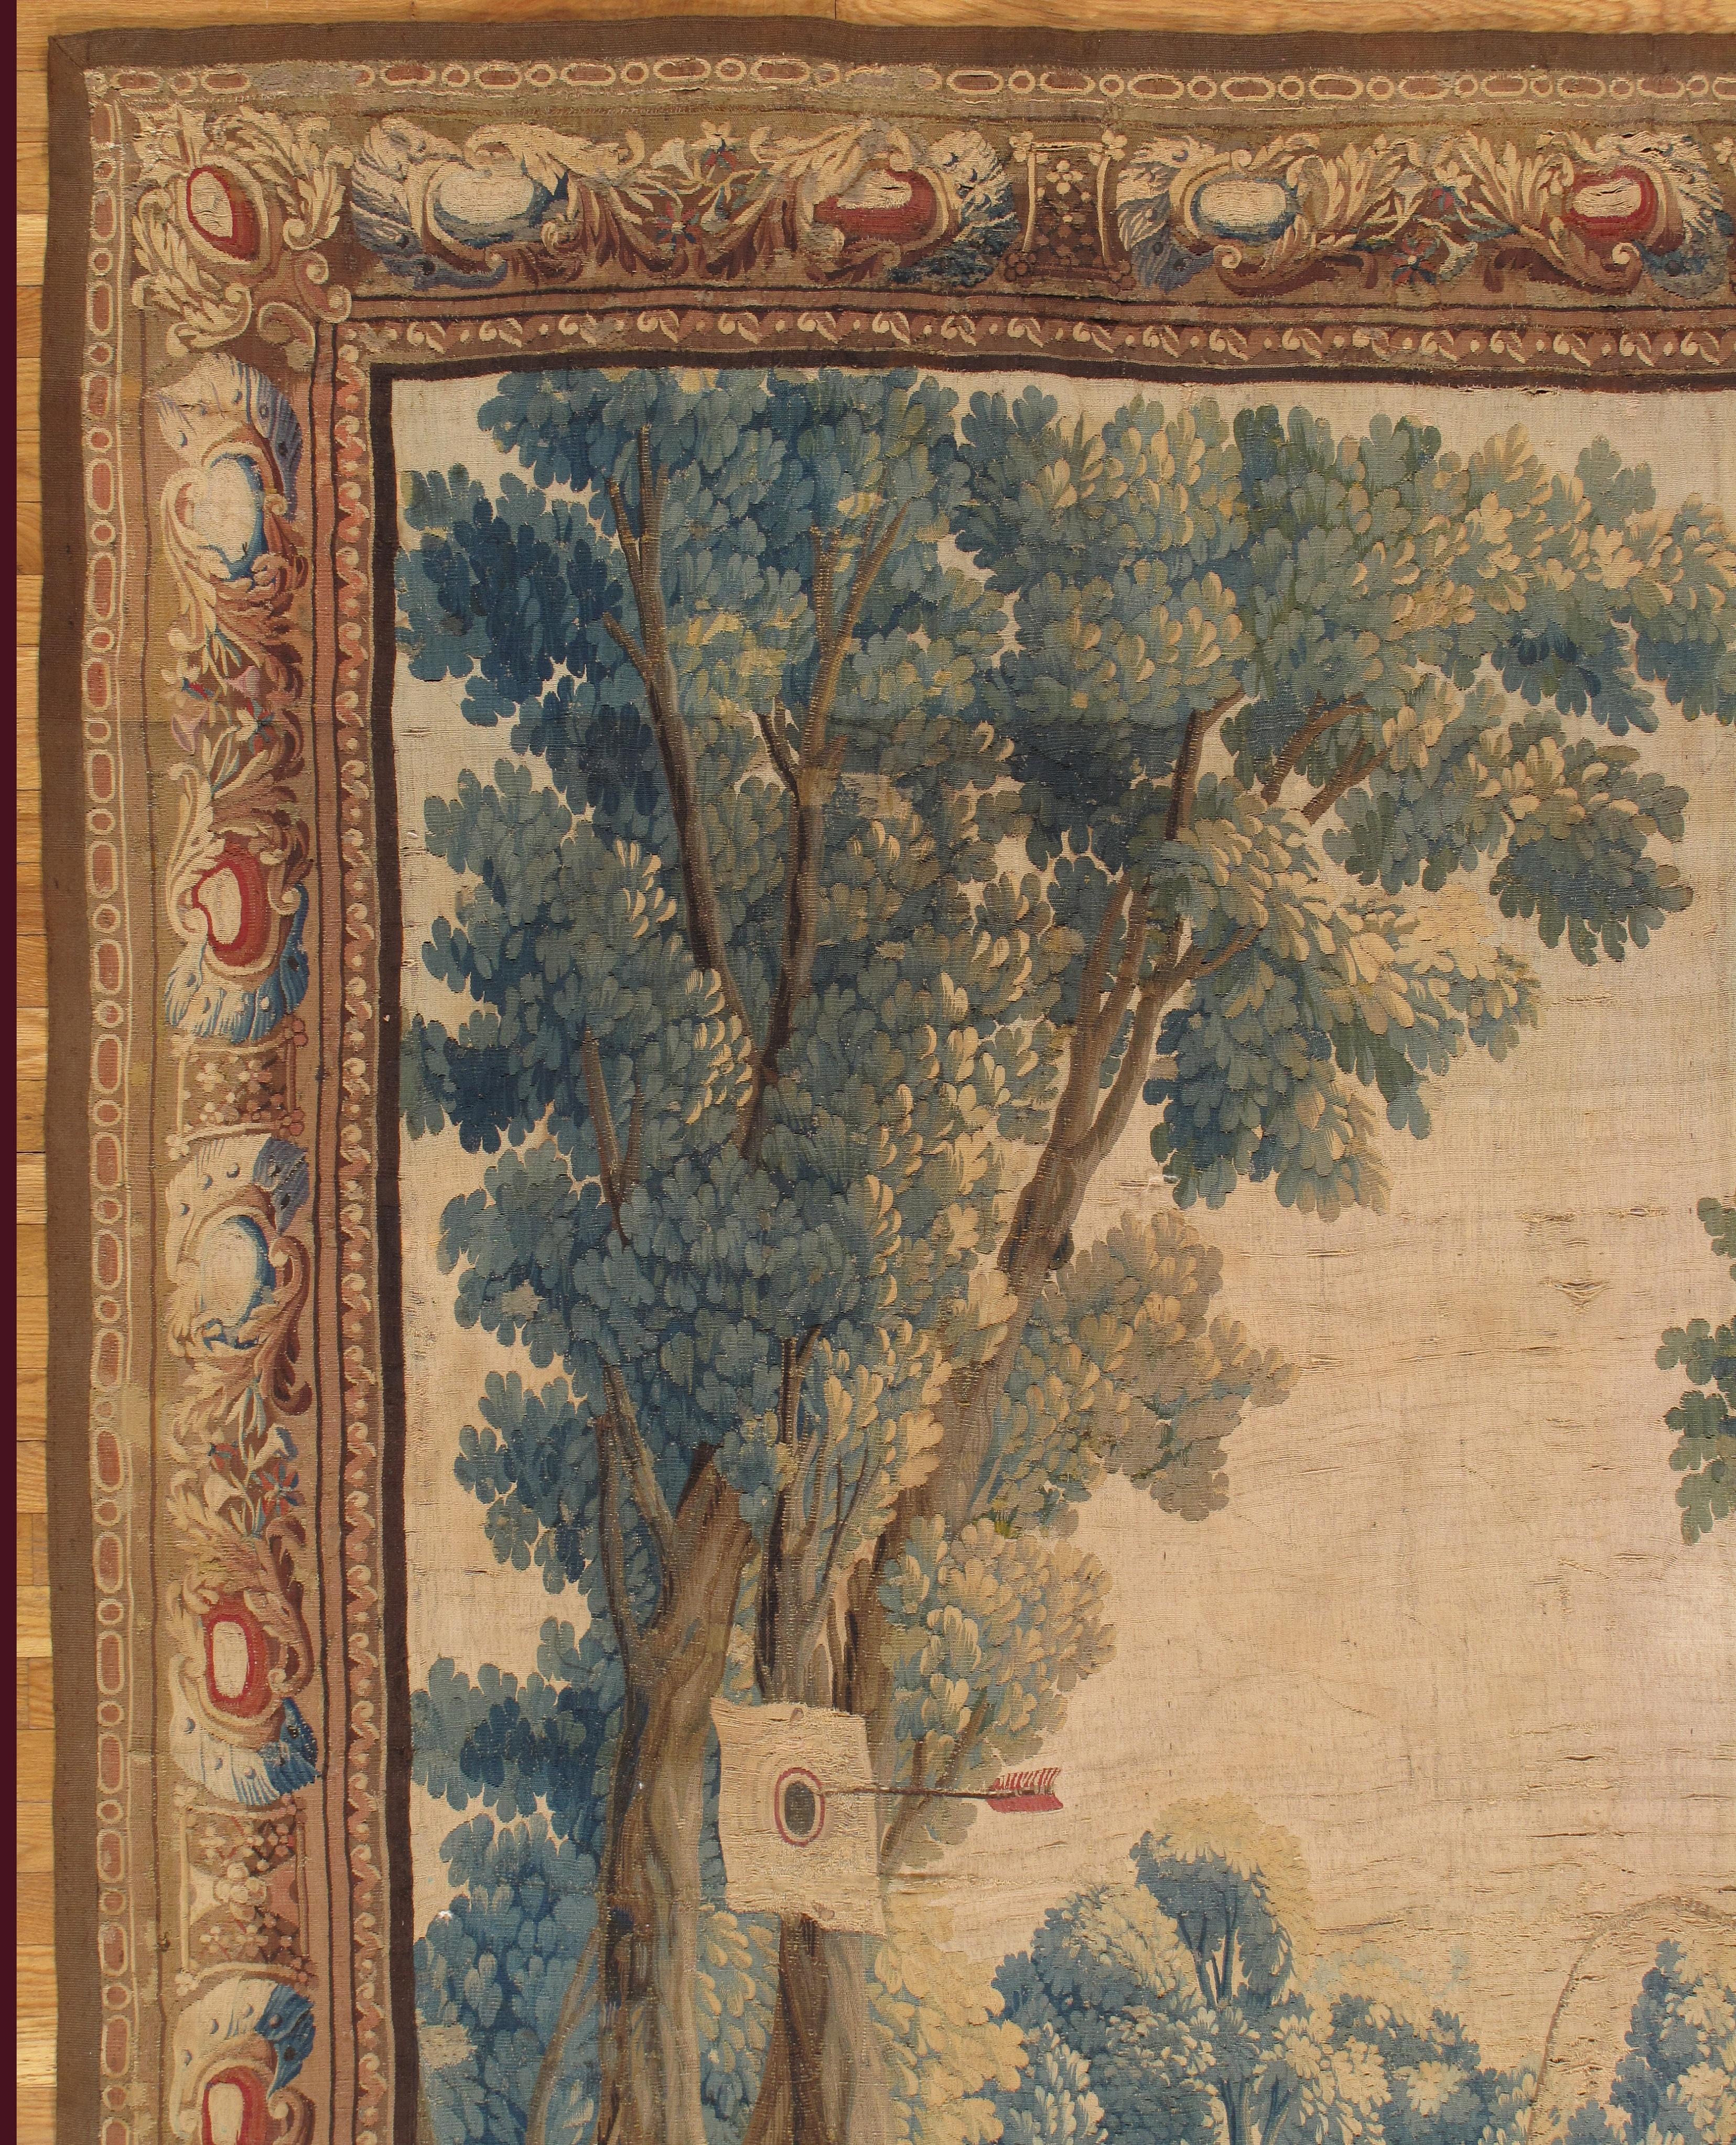 A handwoven Brussels tapestry of dancing peasants in a field with a boy playing jump rope and another with a bow and arrow. 
The foreground shows lush trees and scenery. The border consists of fruits and flowers. 

The colors green, reds, golds, and